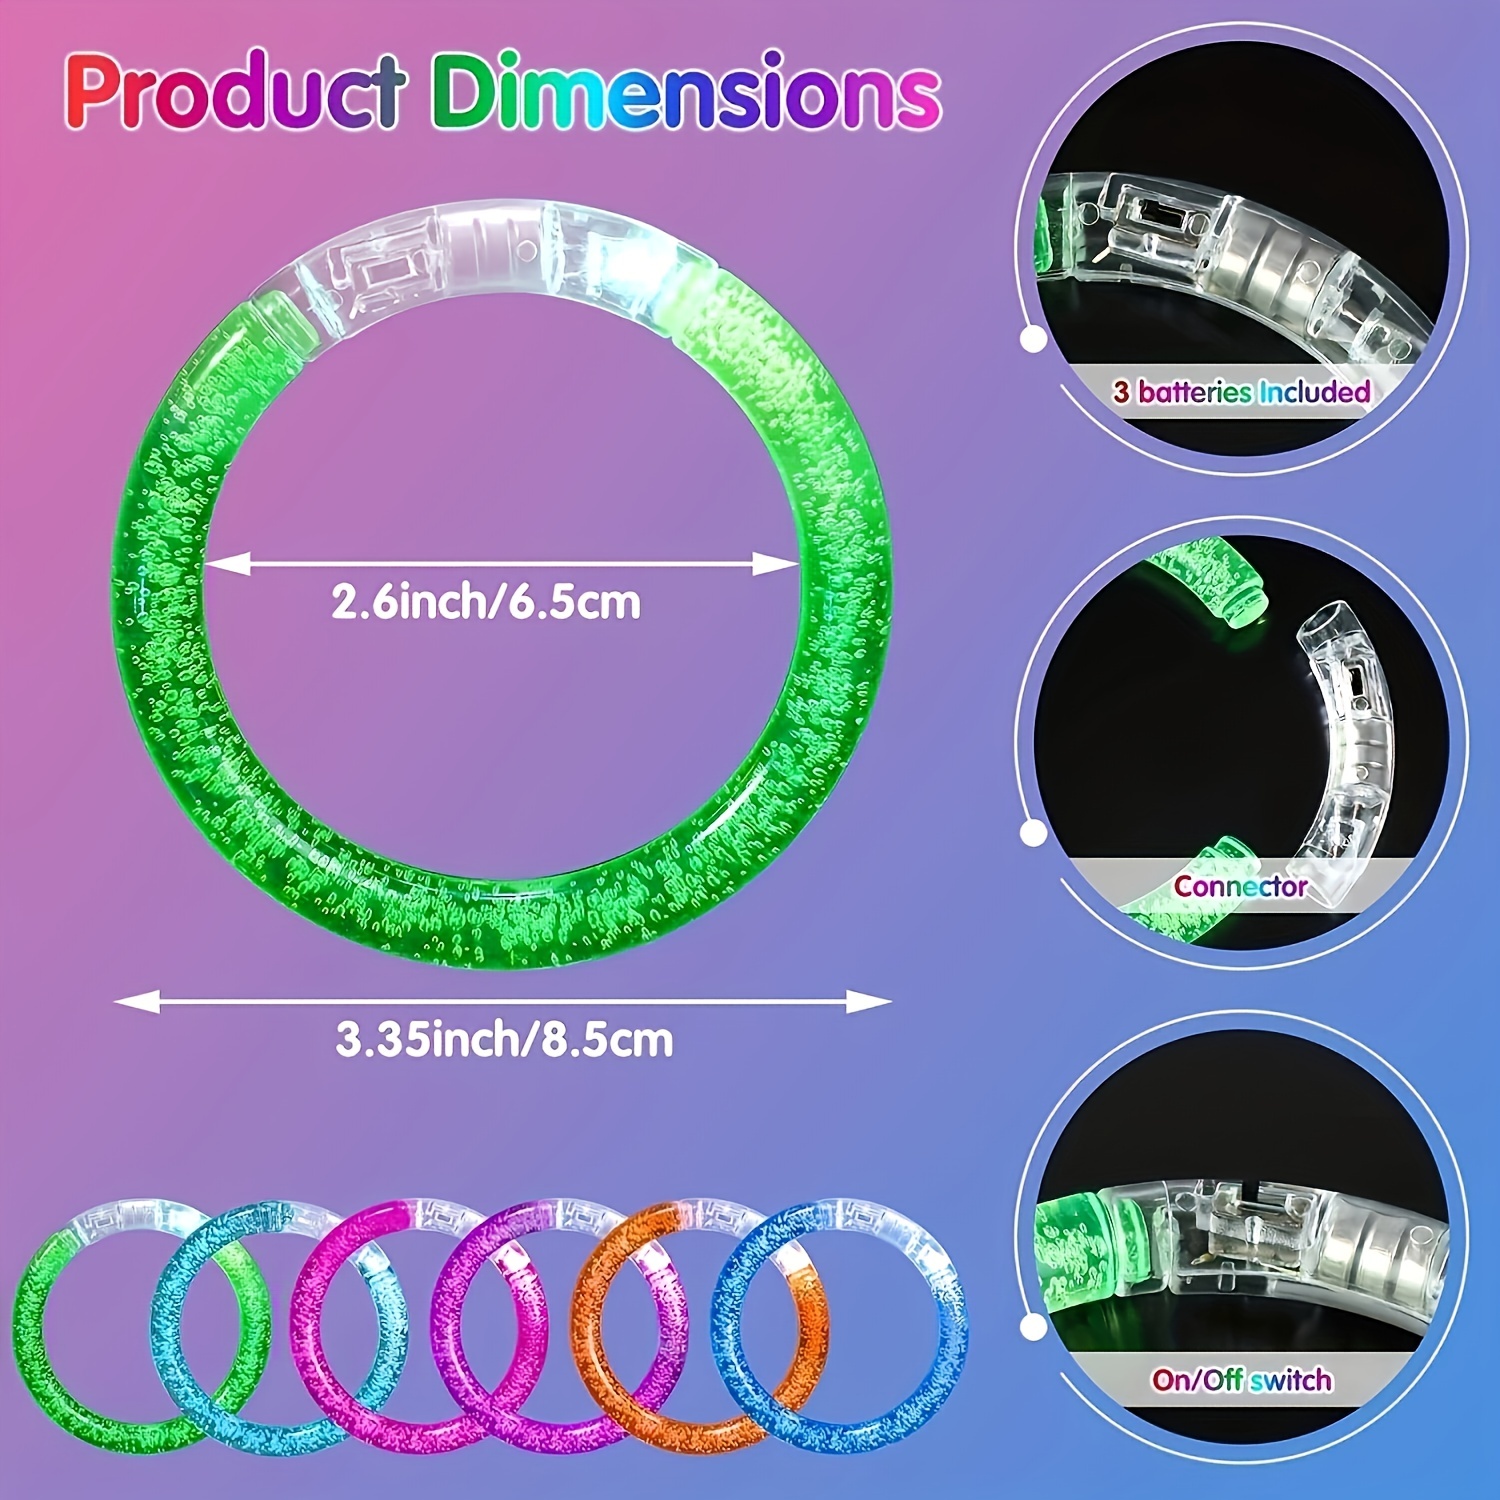 6pcs/set Glow in The Dark LED Bracelets Christmas Halloween Party Supplies Favors Flashing Light Up Bracelet Glow Sticks Party Toys Party Accessory